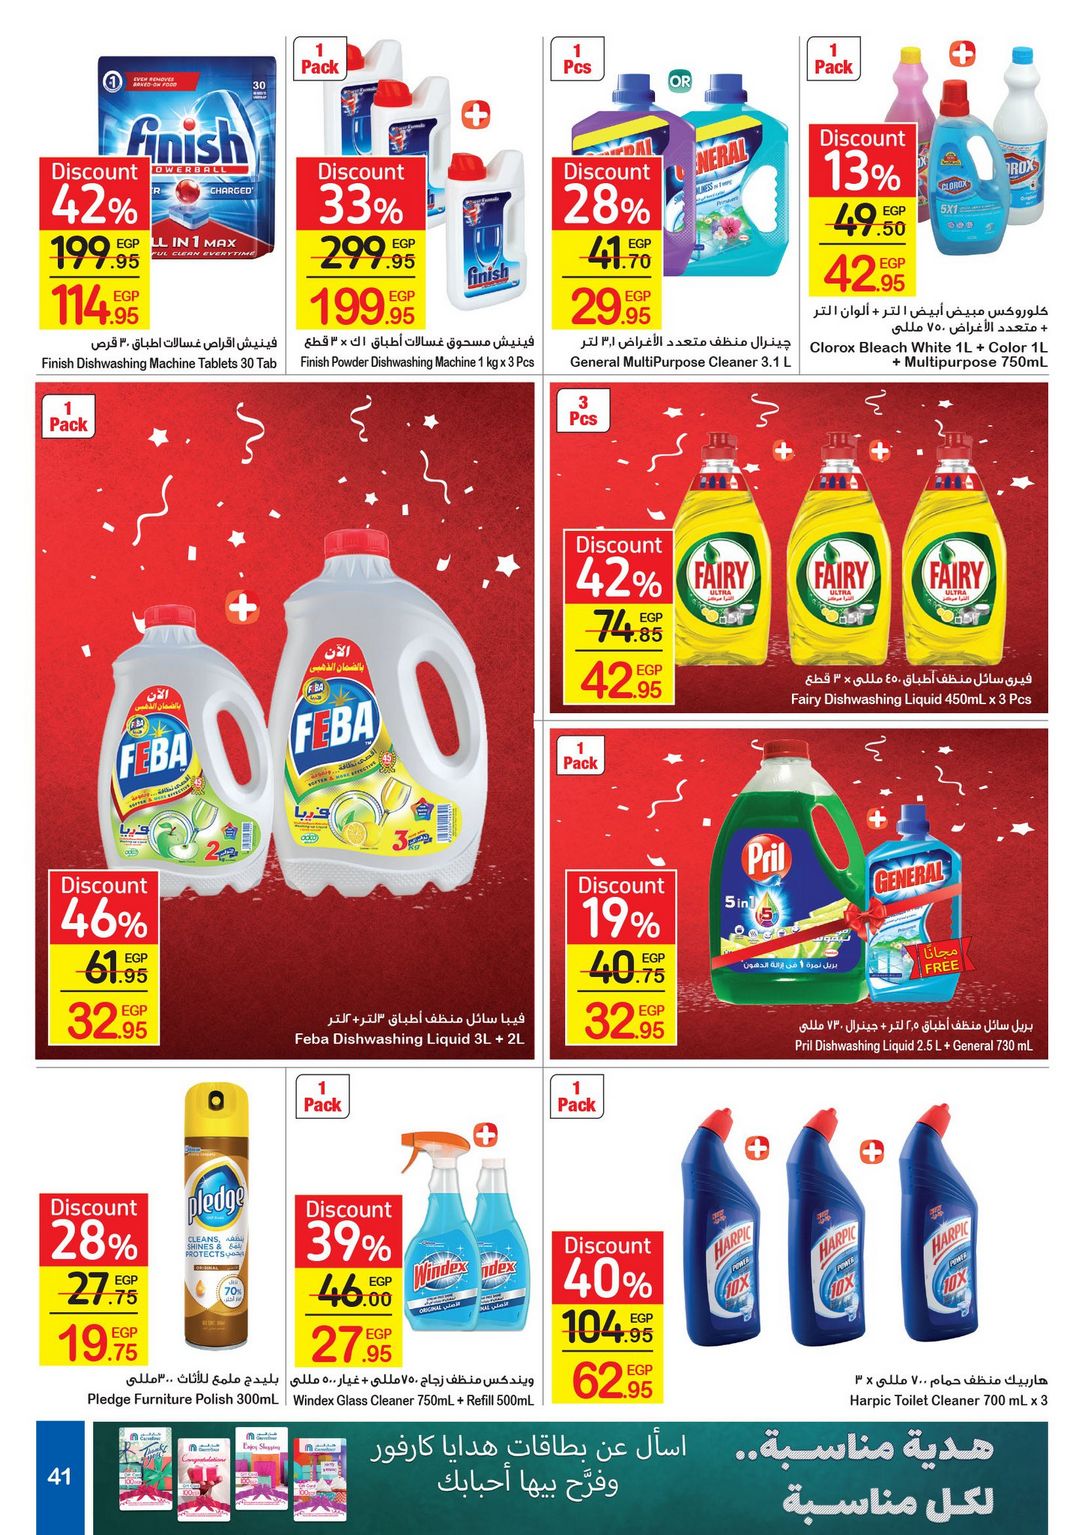 Carrefour Anniversary Offers till 18/2/2021 | Carrefour Egypt 43